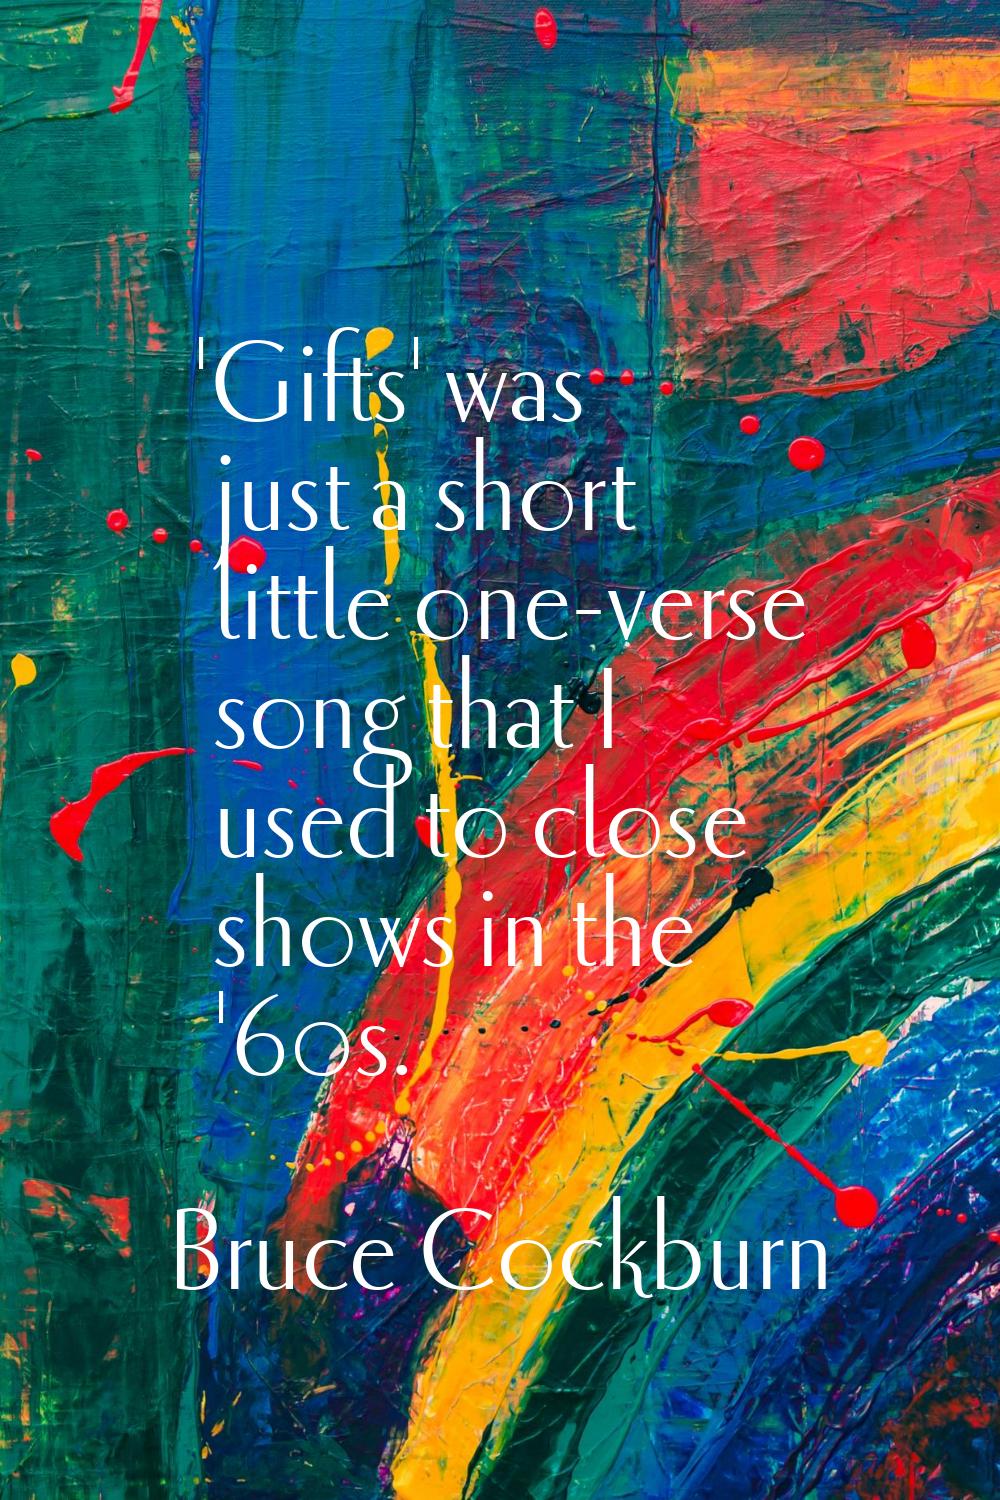 'Gifts' was just a short little one-verse song that I used to close shows in the '60s.